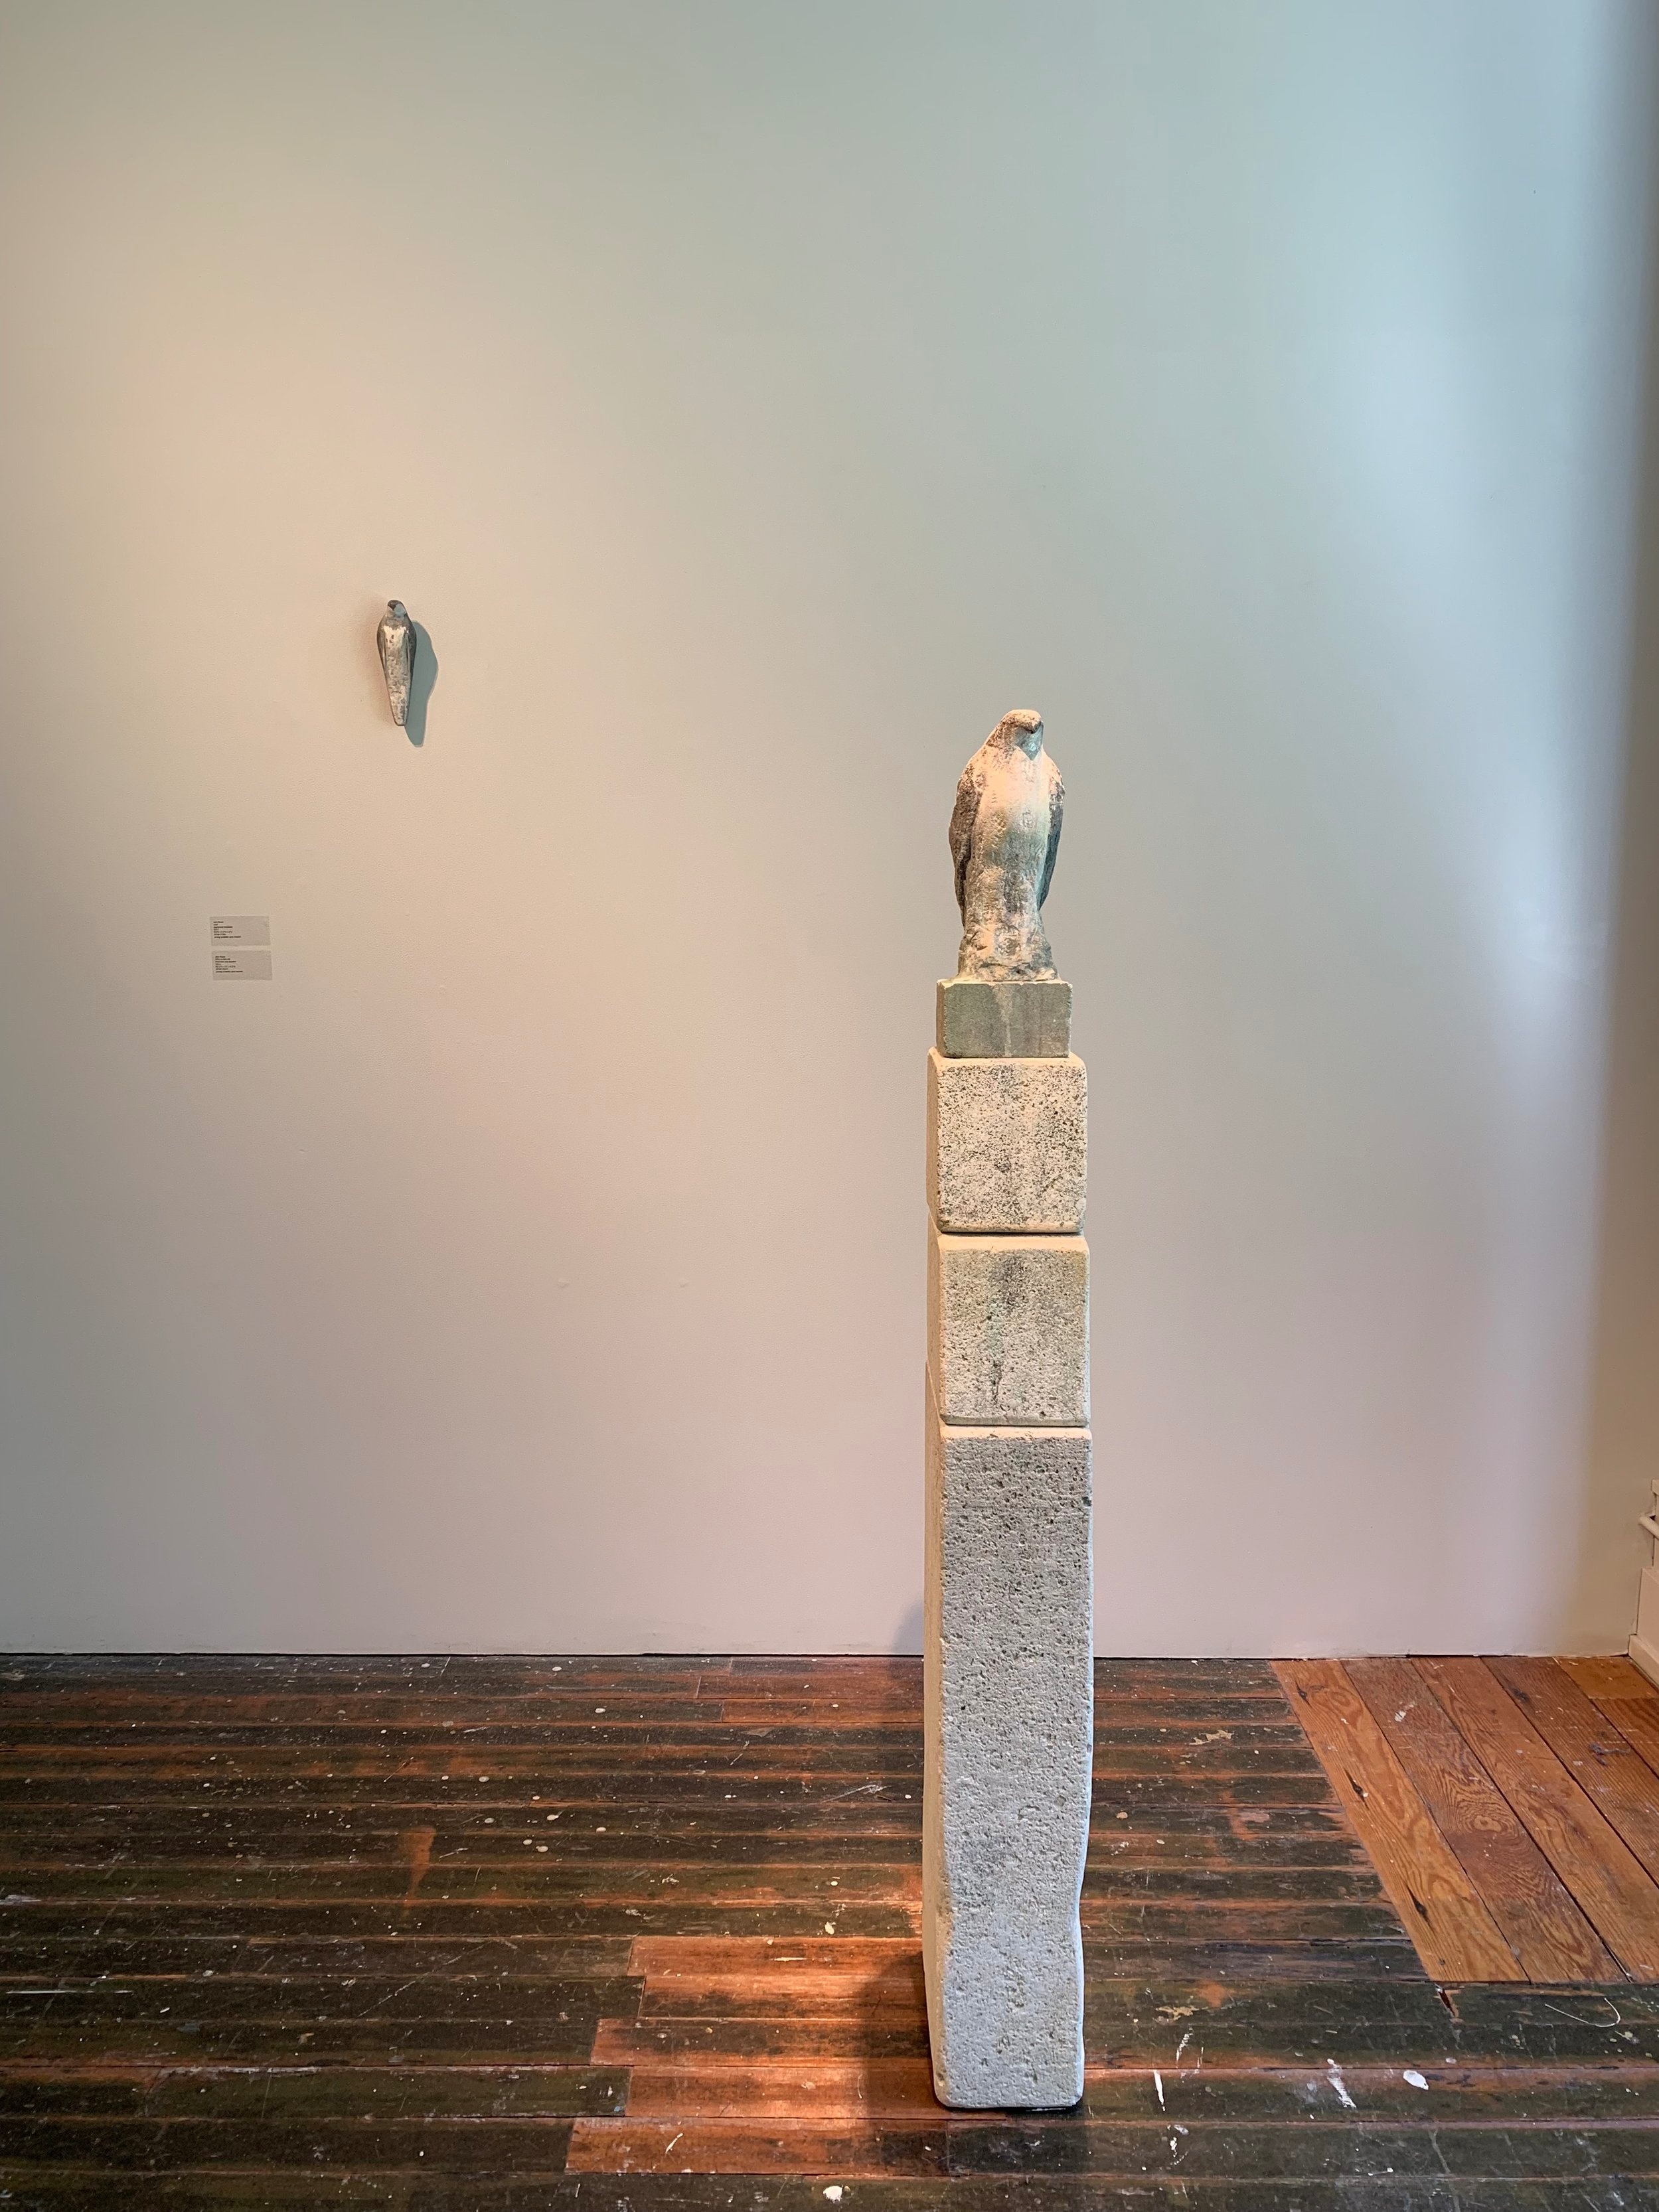  “Leaf,” 2017 (left) and ”Stella Dallas,” 2014 (right) 8.5 x 2.5 x 2 inches (left) and 62.5 x 12 x 6.5 inches Pigmented limestone   